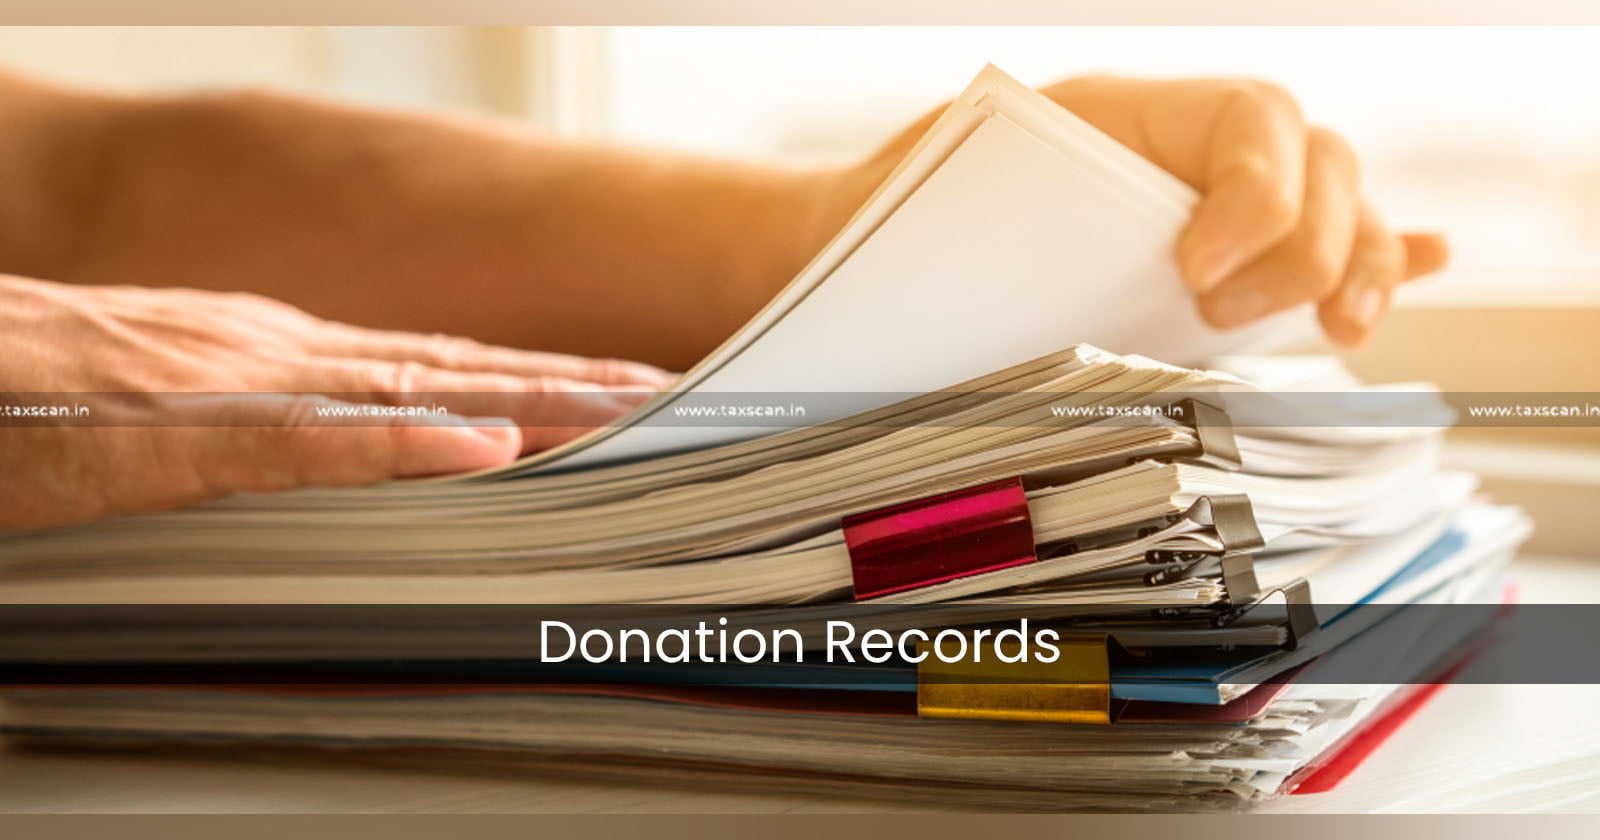 ITAT deletes Addition Based on Compliance with Donation Records - ITAT deletes Addition - ITAT - Addition - Income Tax Act - Donation - Donation Records - Taxscan